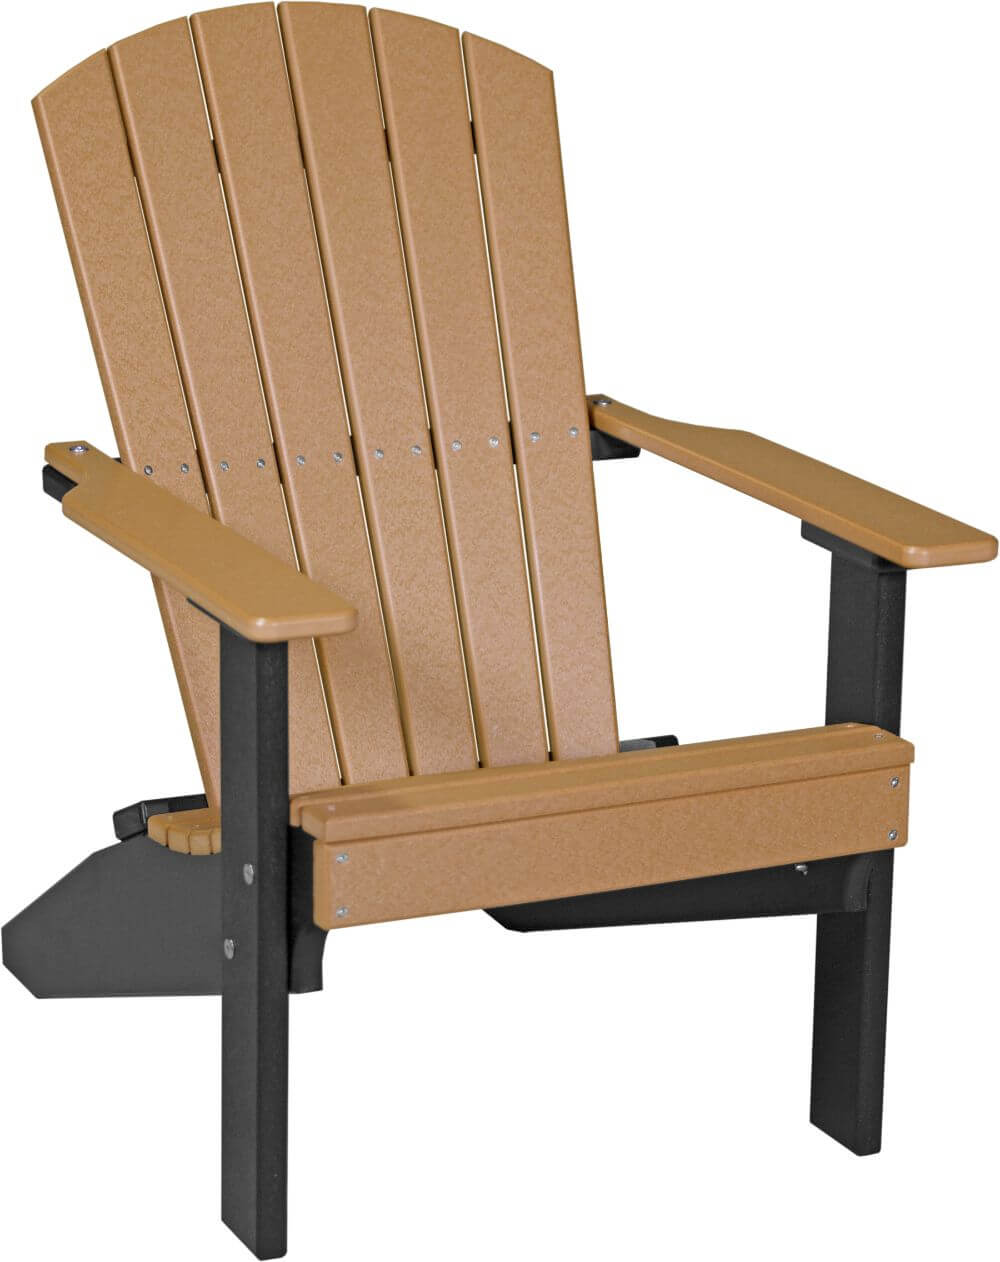 Luxcraft Poly (Recycled Plastic) Lakeside Adirondack Chair